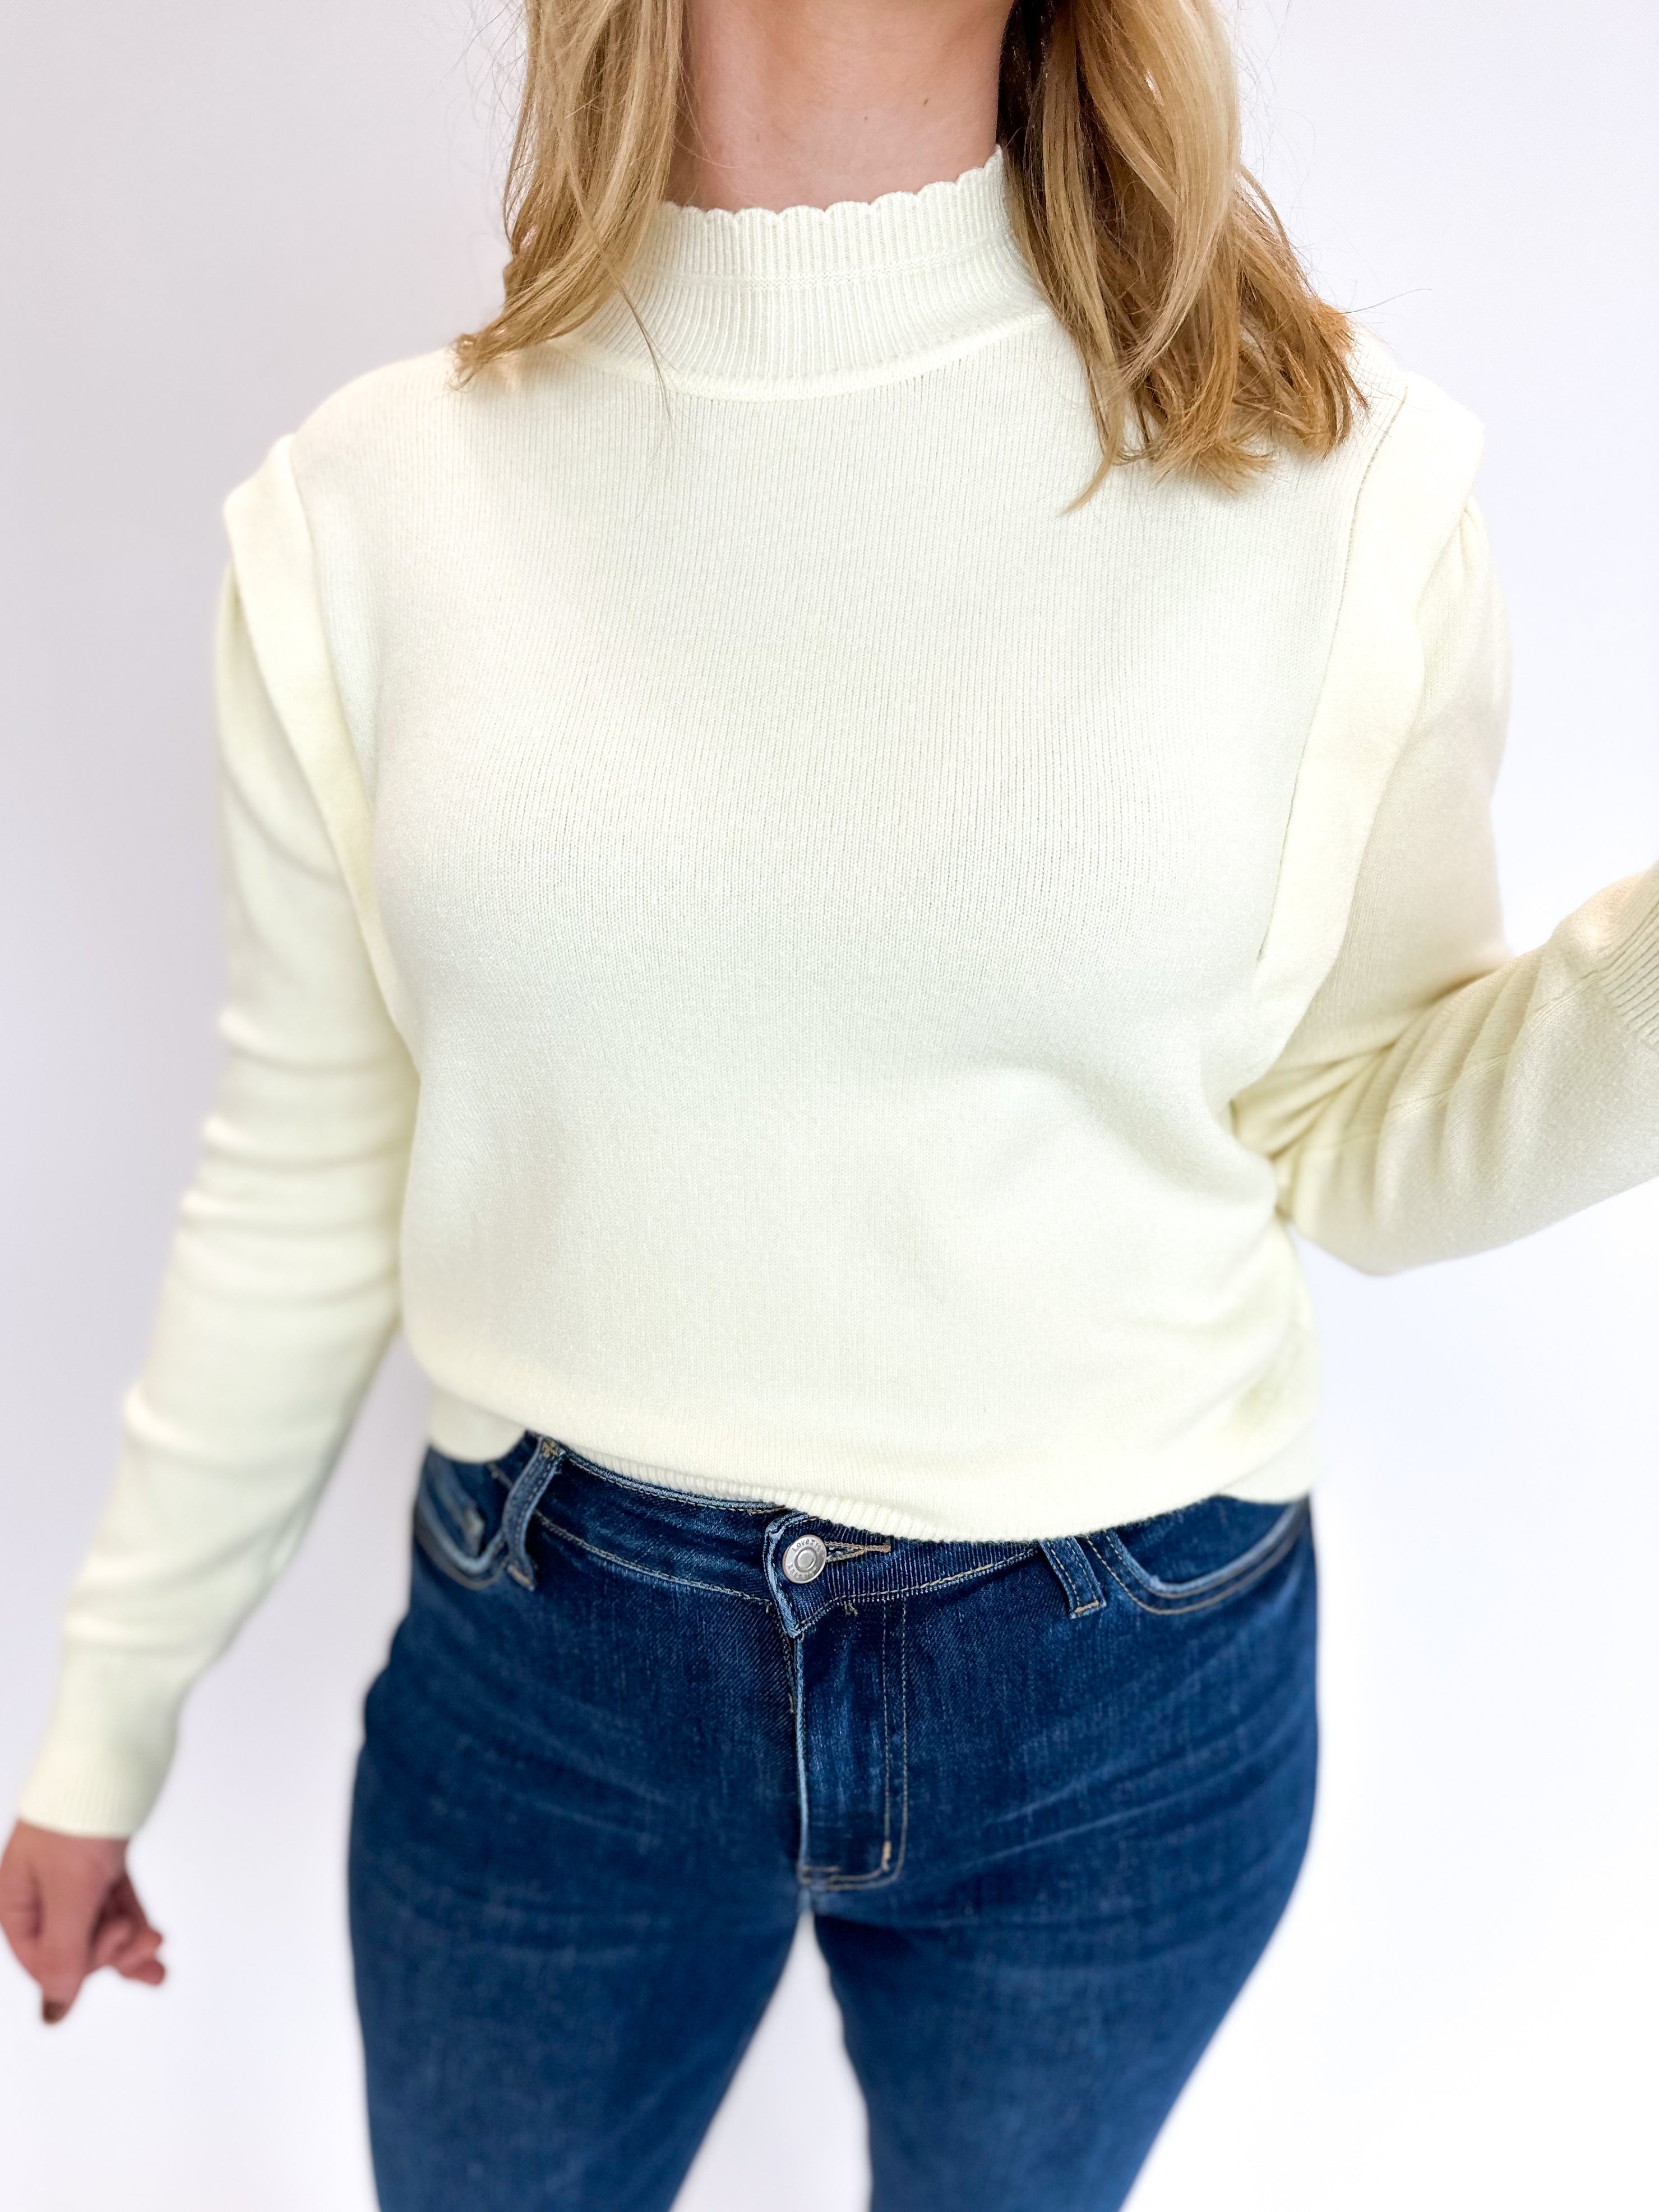 Ivory Cap Sleeved Sweater Top-230 Sweaters/Cardis-&MERCI-July & June Women's Fashion Boutique Located in San Antonio, Texas